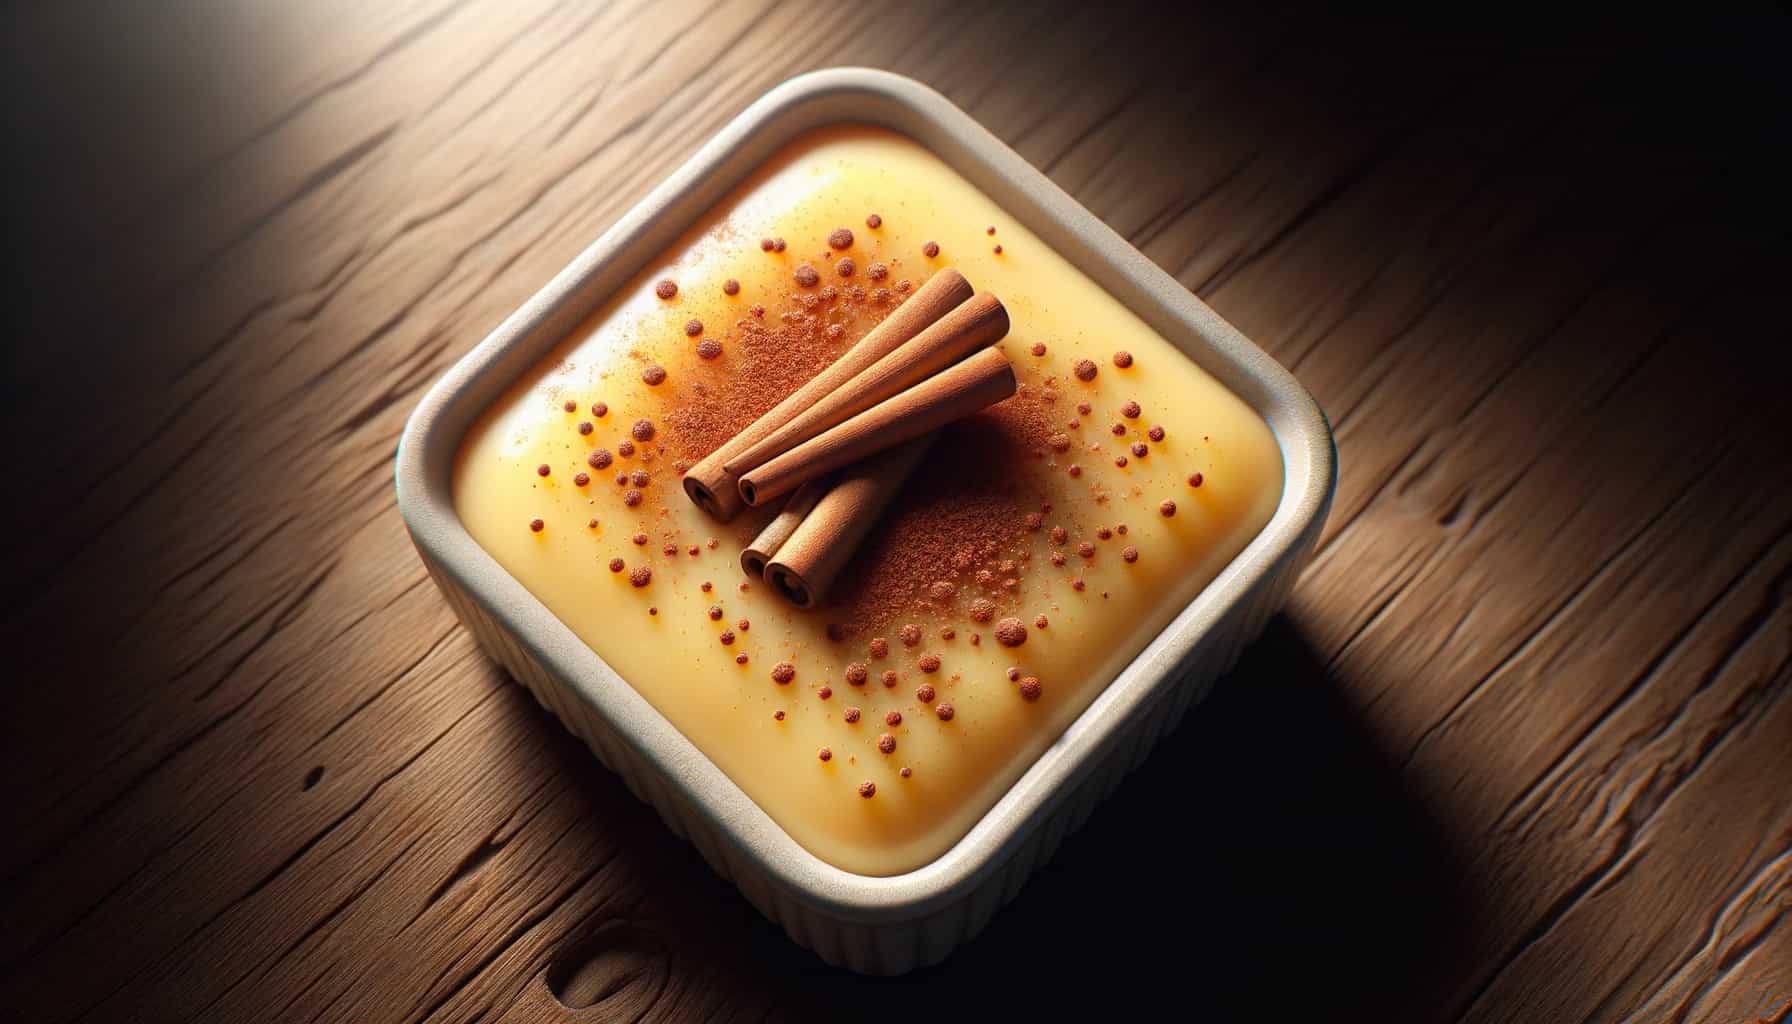 Curau (corn pudding) is in a square-shaped dish. The pudding is velvety and rich, with a few sprinkles of cinnamon on top,.